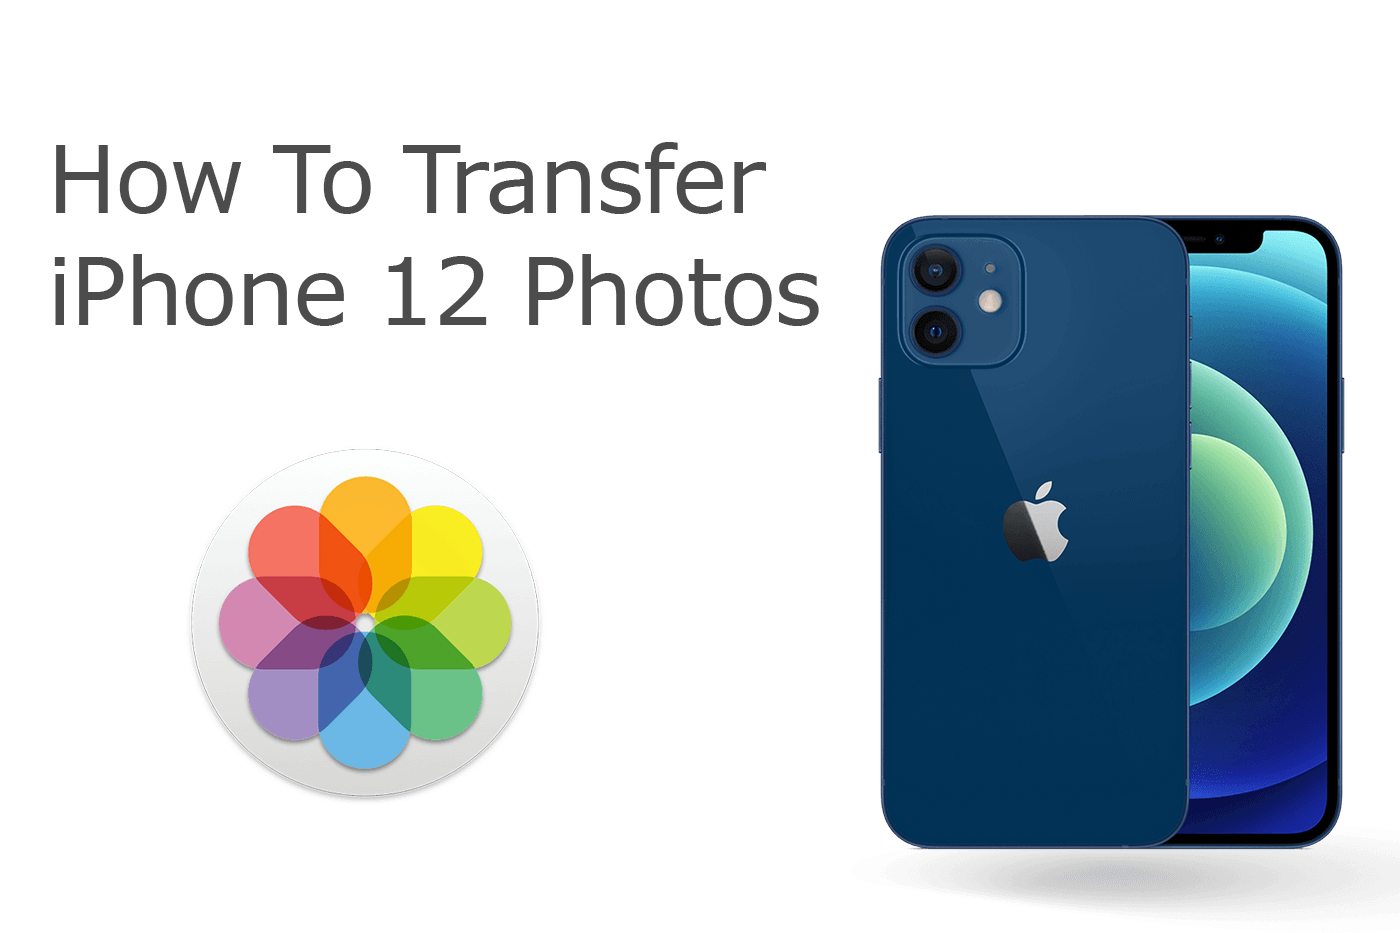 How To Transfer Photos from iPhone To iPhone 12